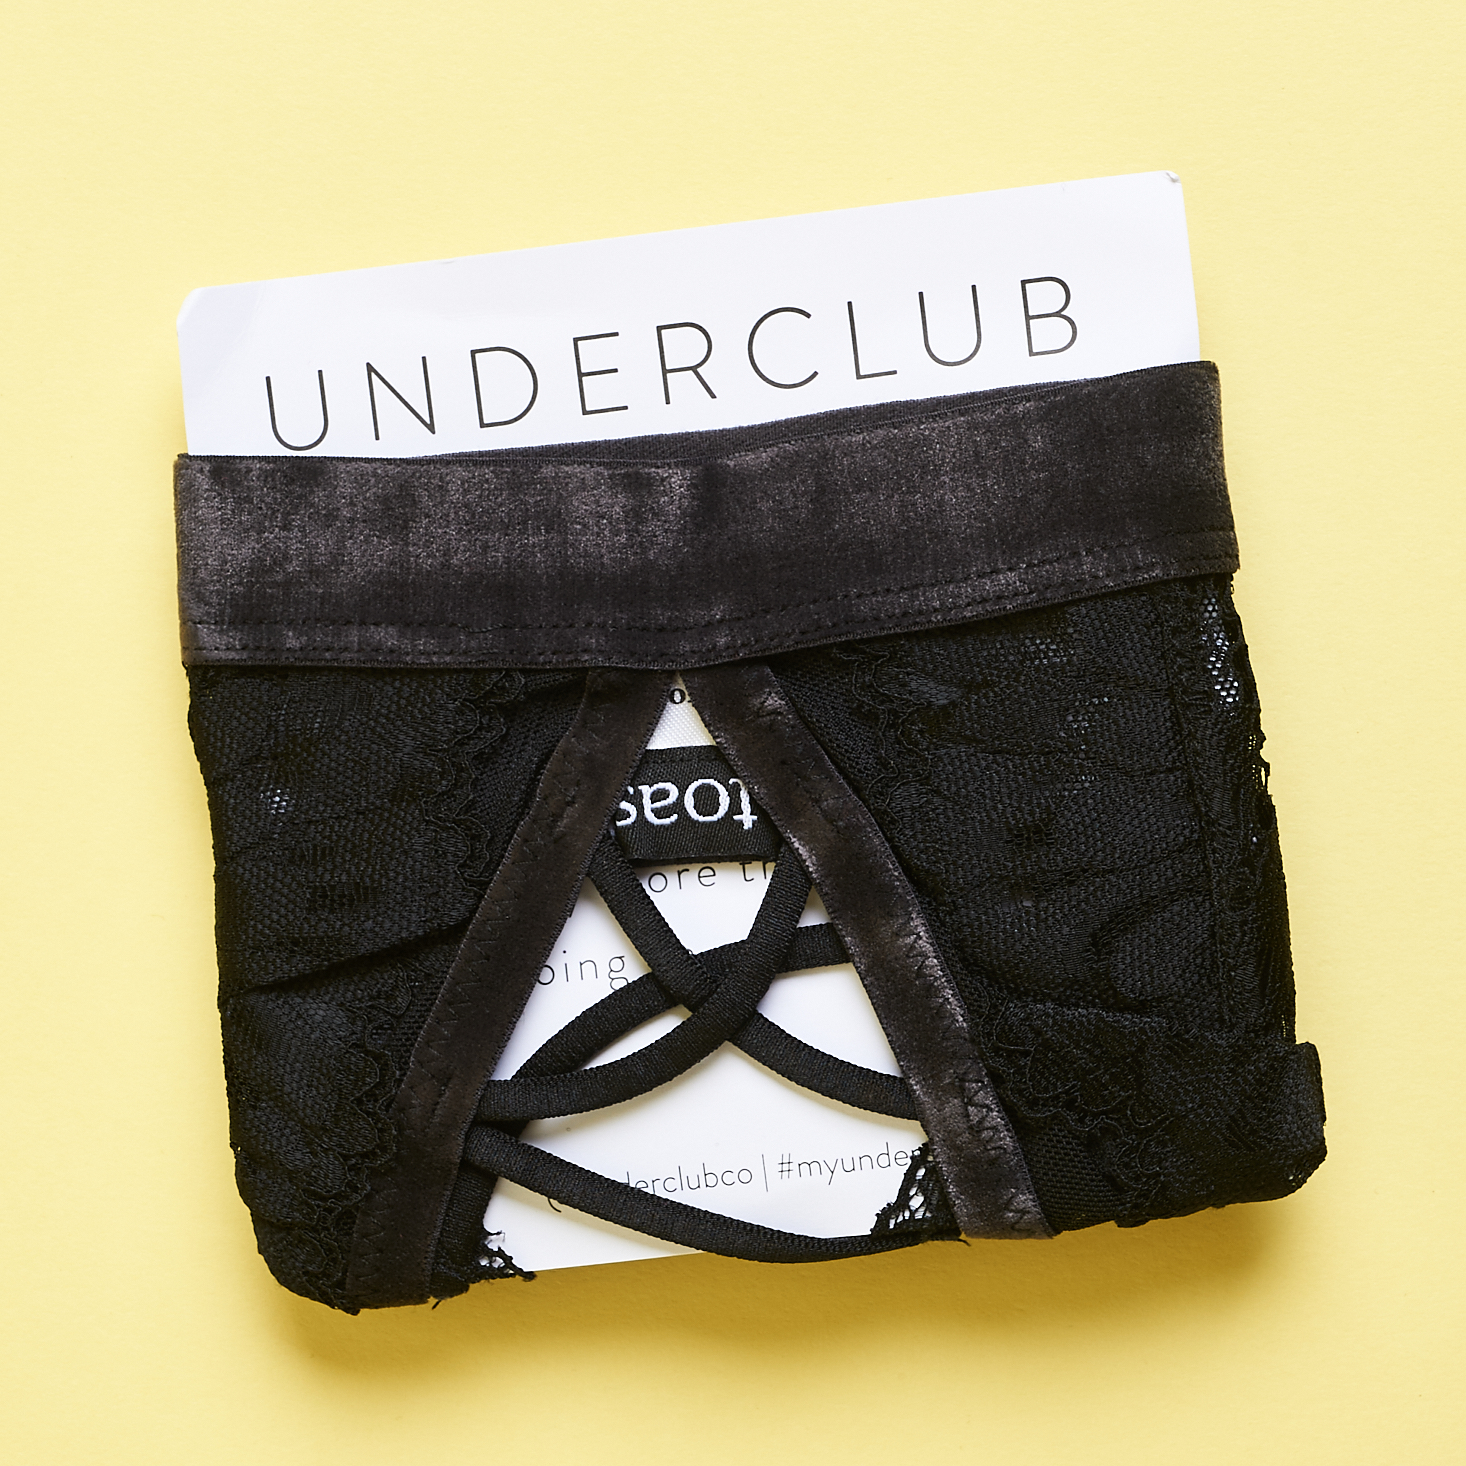 Underclub black lace bralette wrapped around card